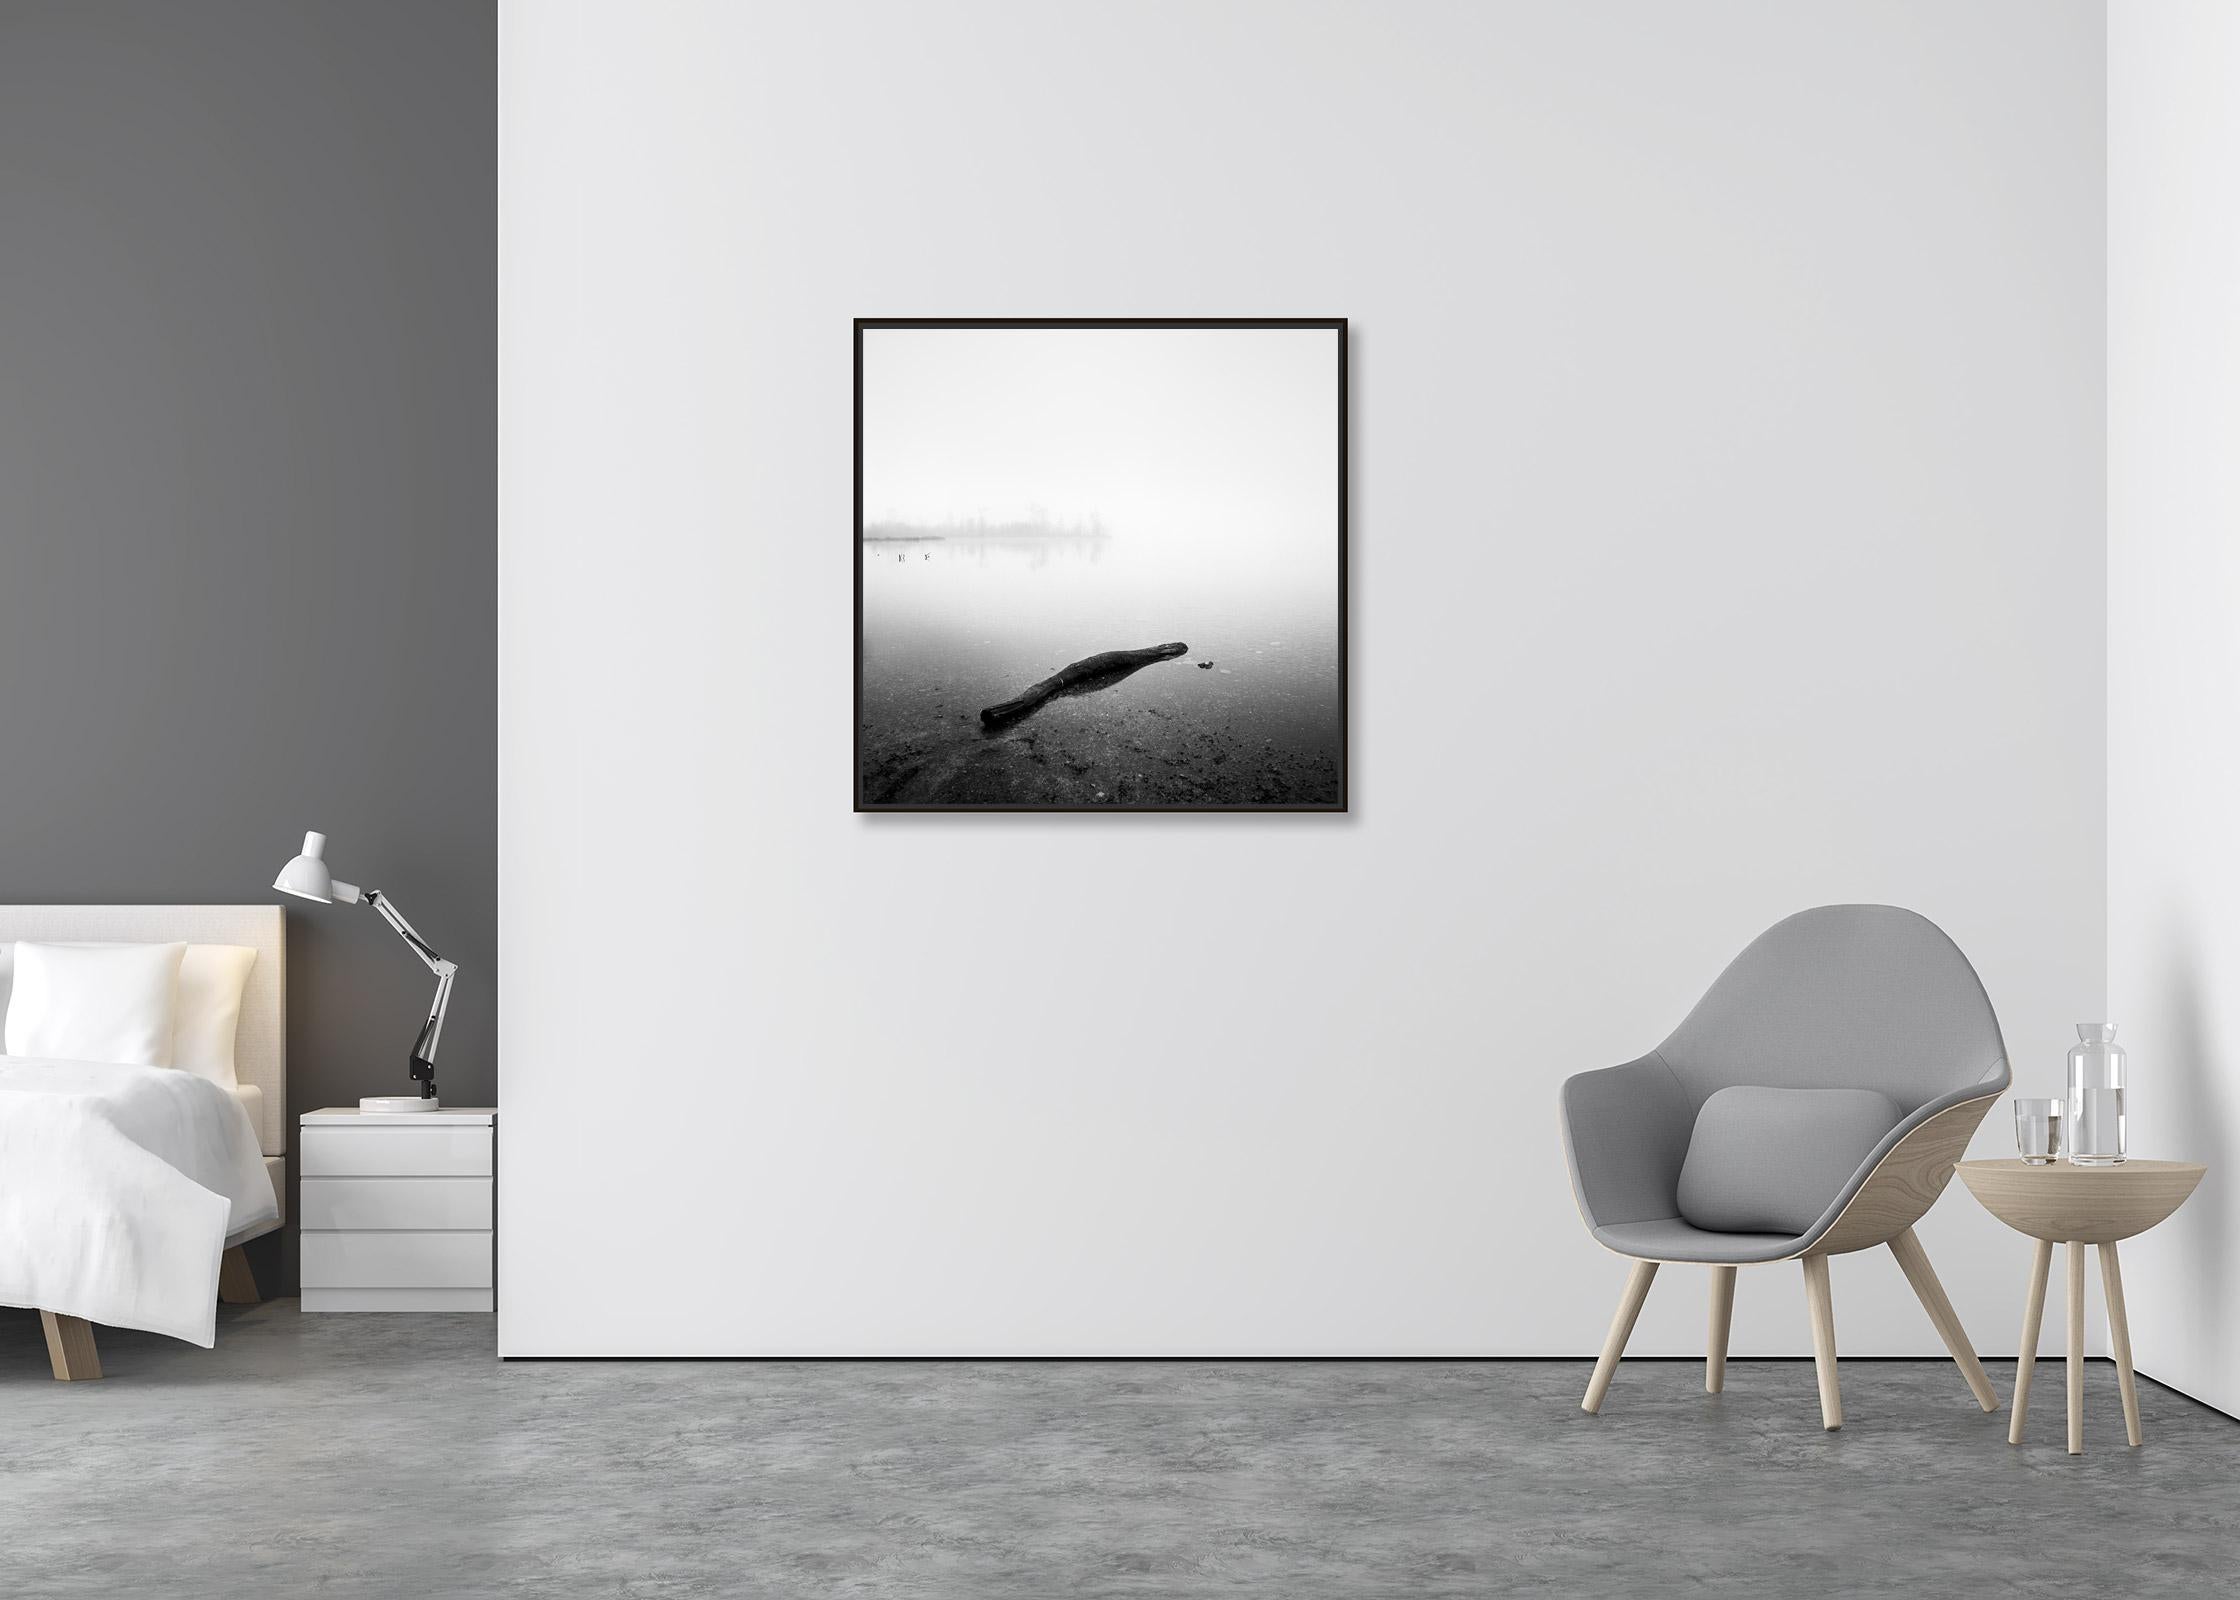 Drift Wood, Lake, Austria, black and white long exposure photography, landscape - Contemporary Photograph by Gerald Berghammer